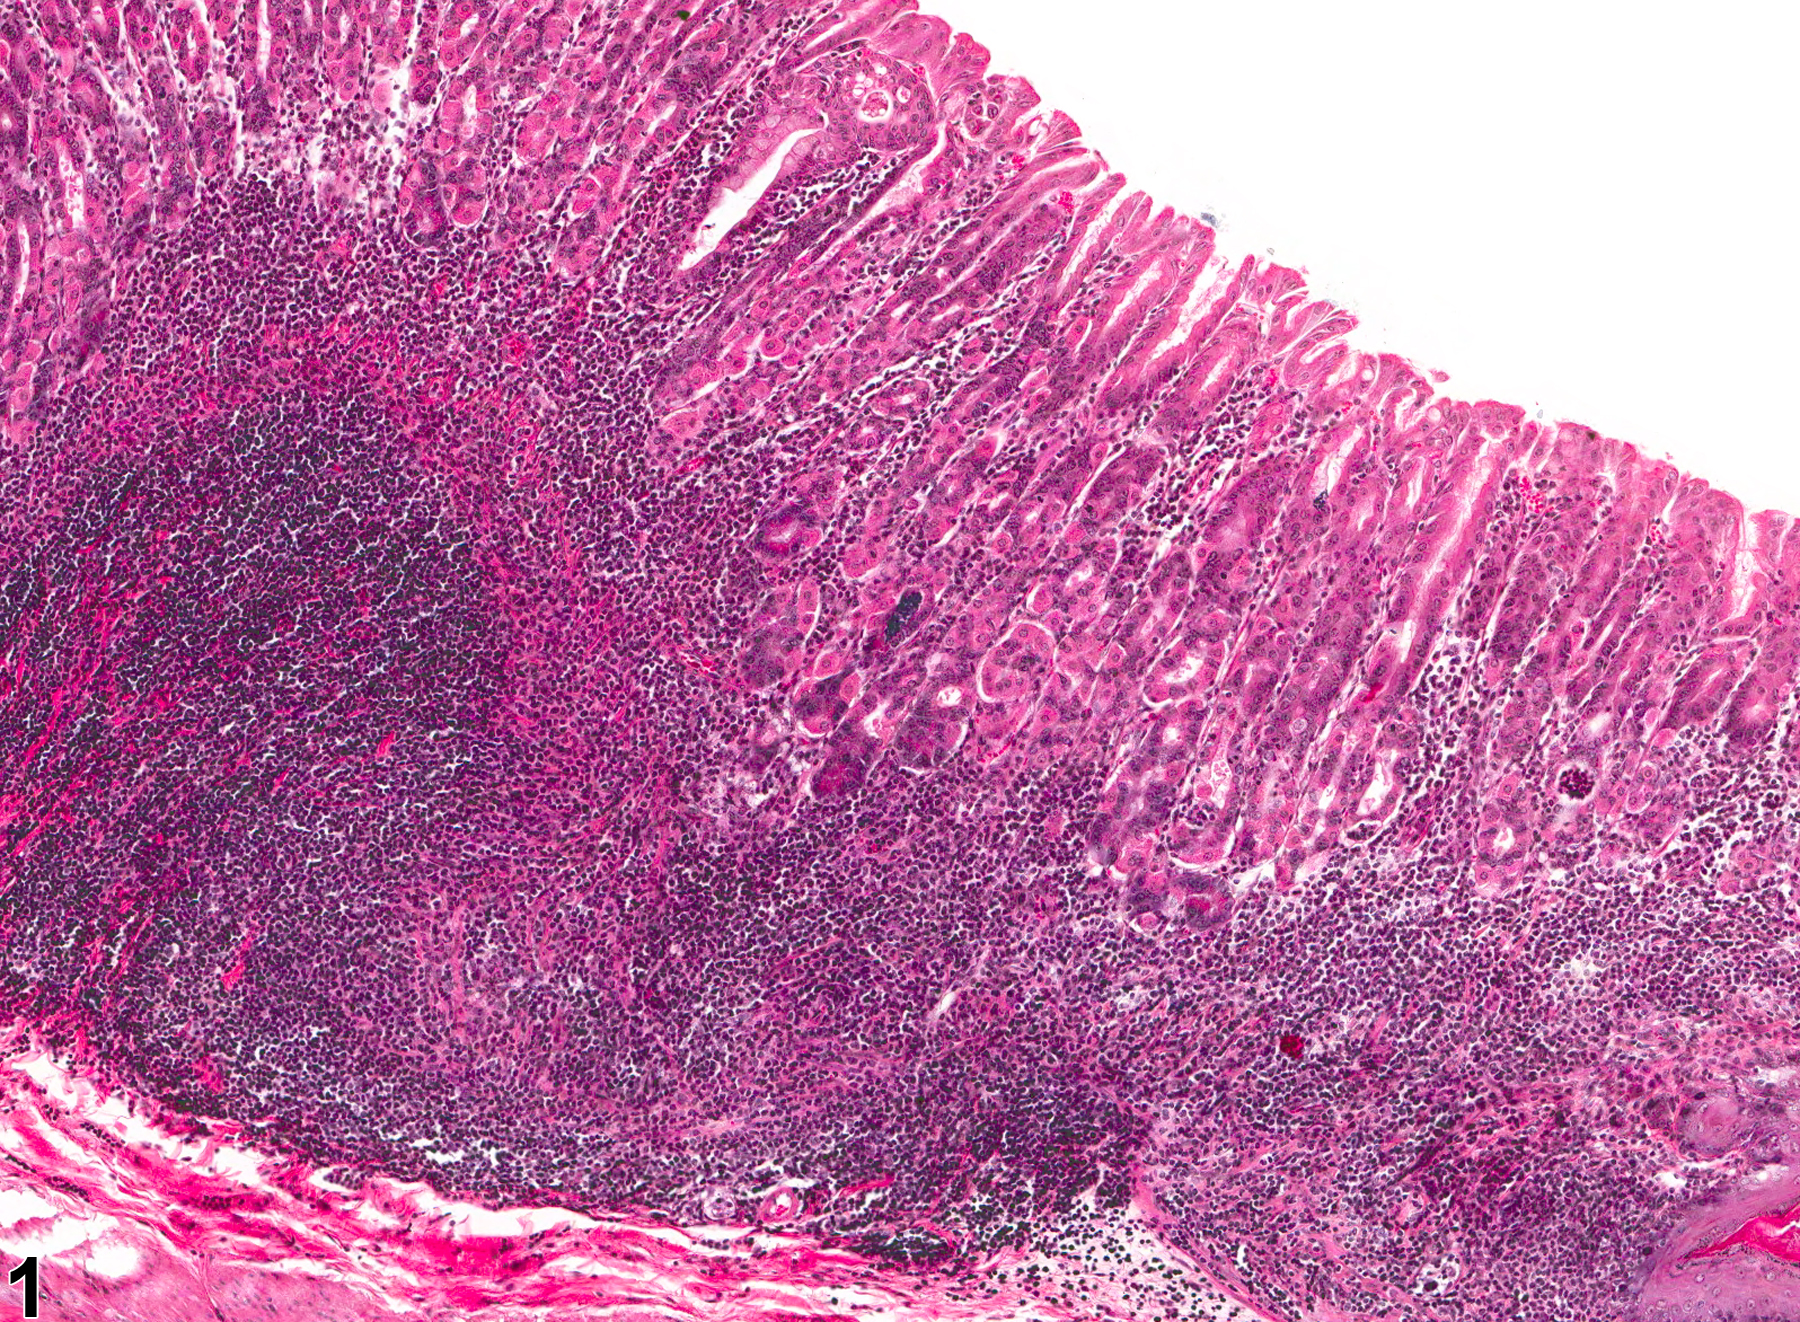 Image of inflammation in the glandular stomach from a male B6C3F1 mouse in a chronic study